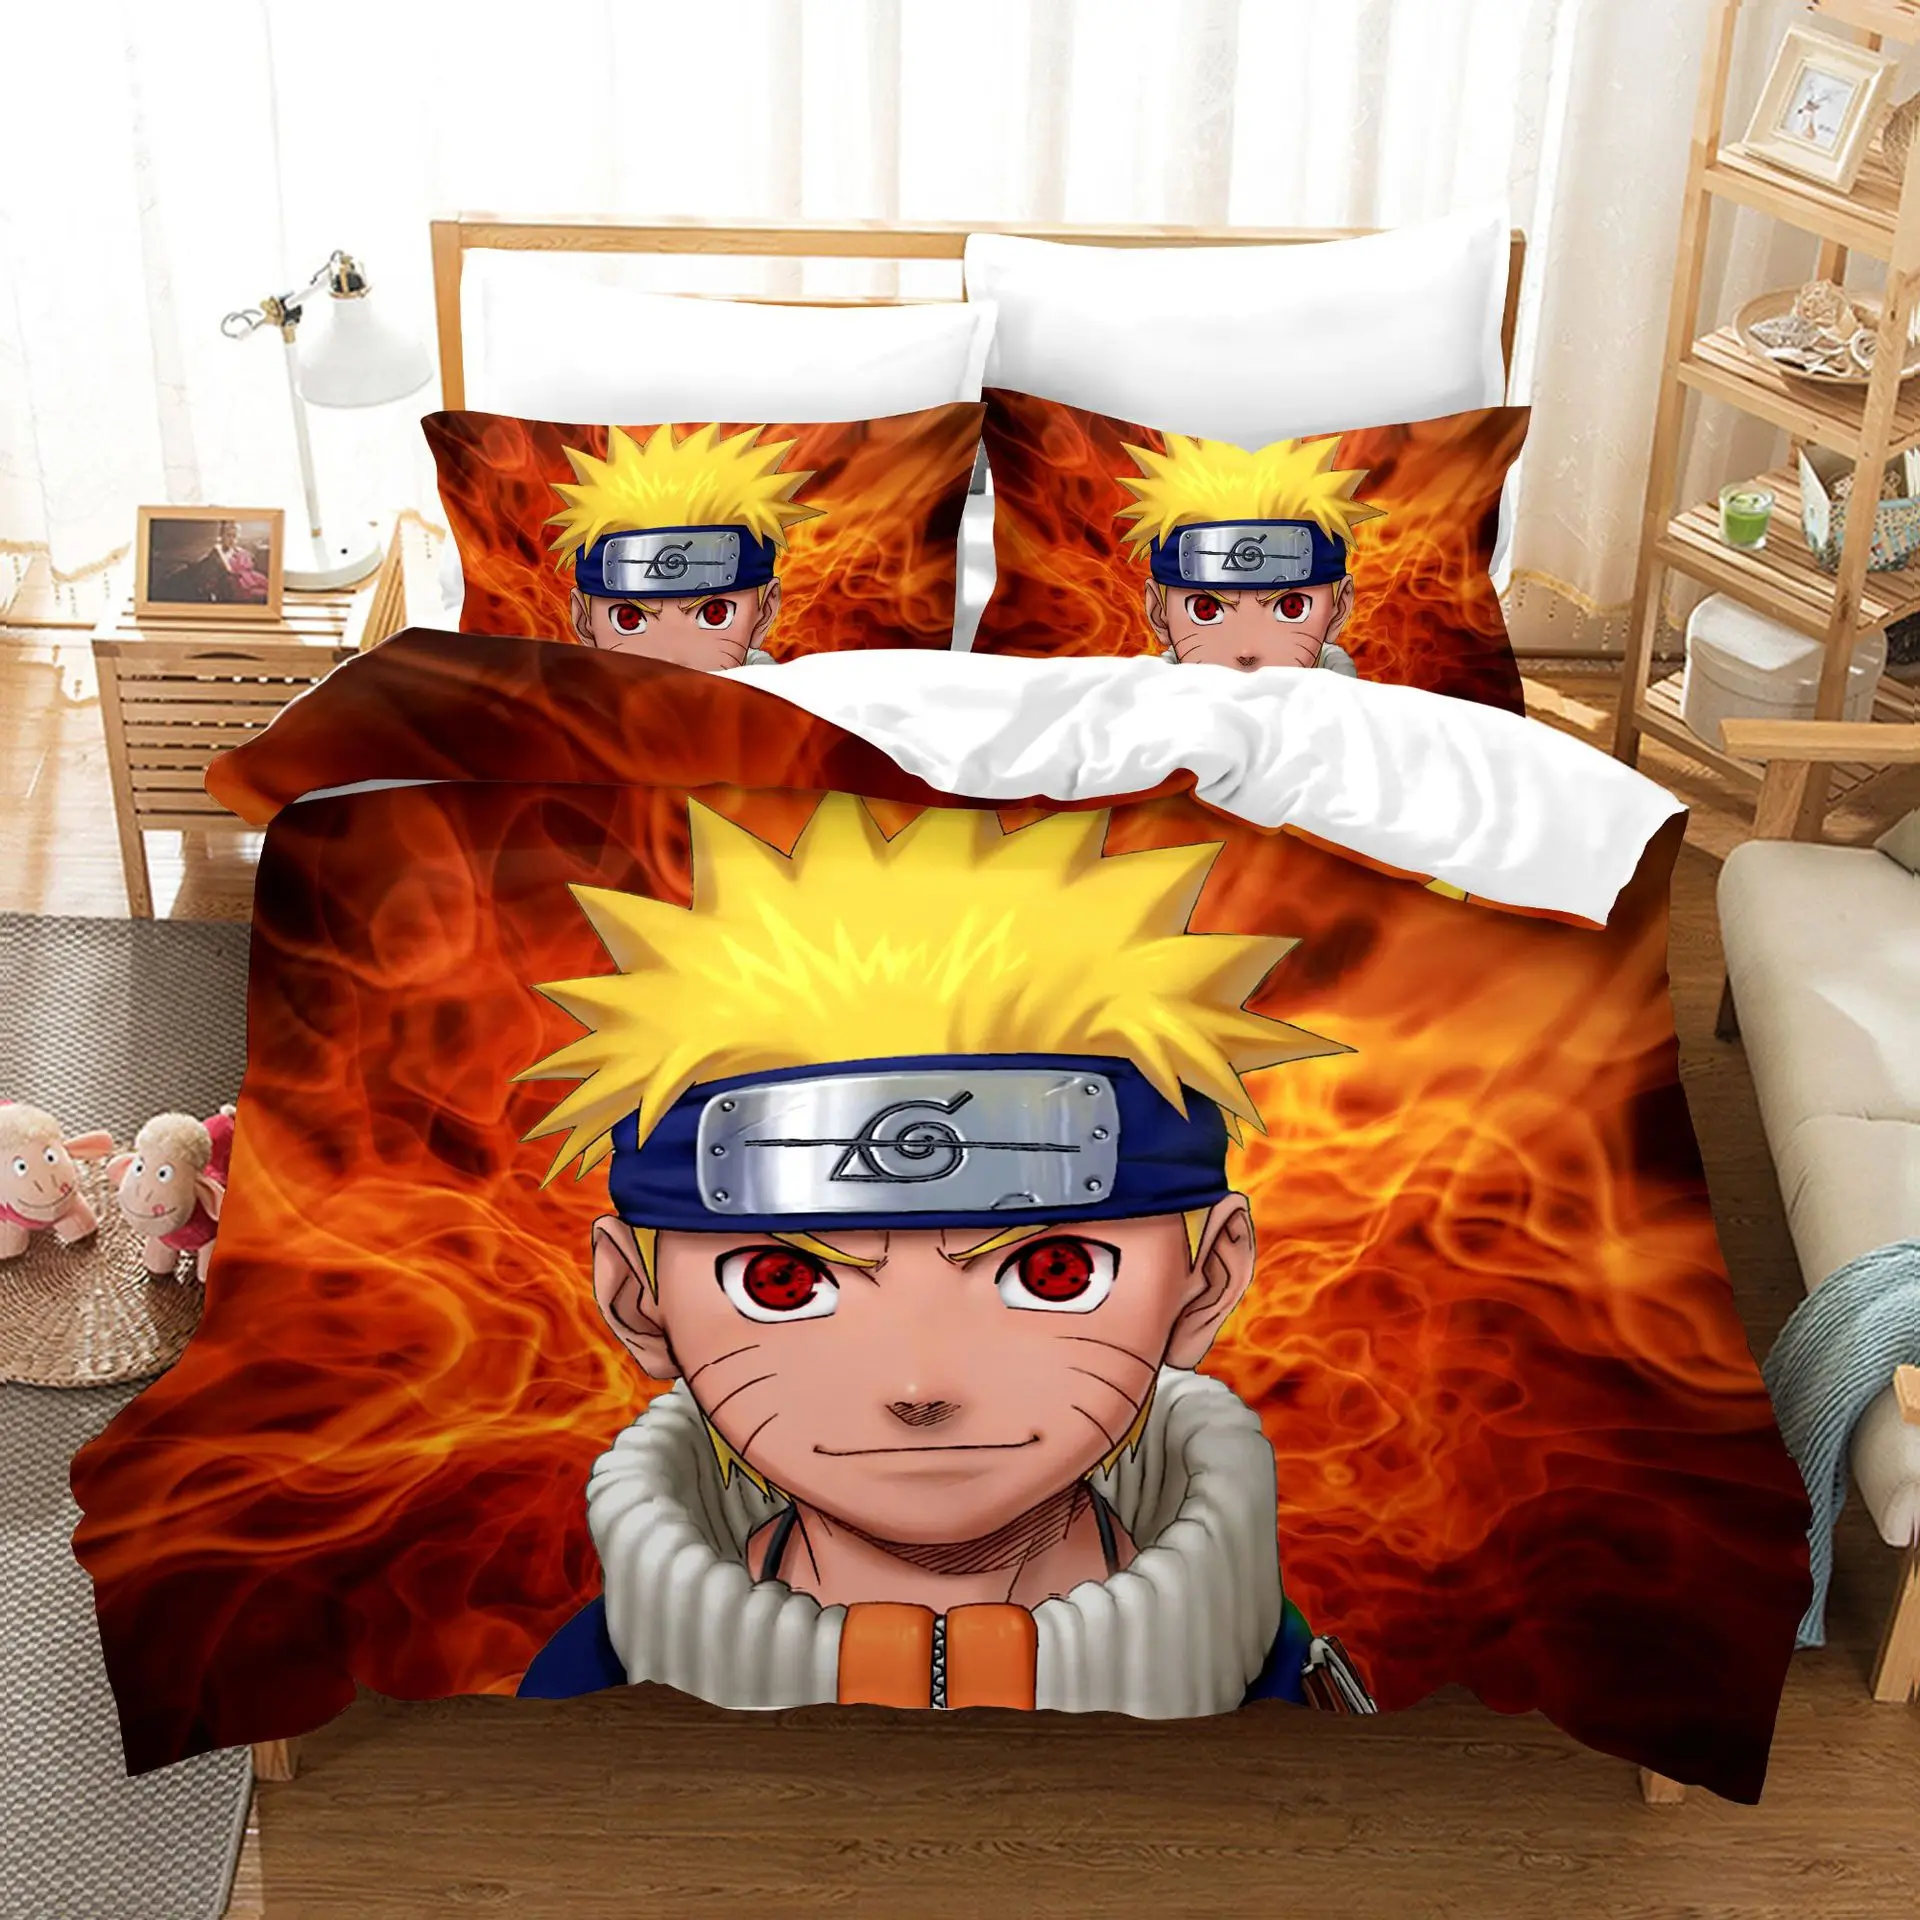 Naruto Anime Bedding Set Duvet/Quilt Cover Pillowcases Domitory/Bedroom Students 